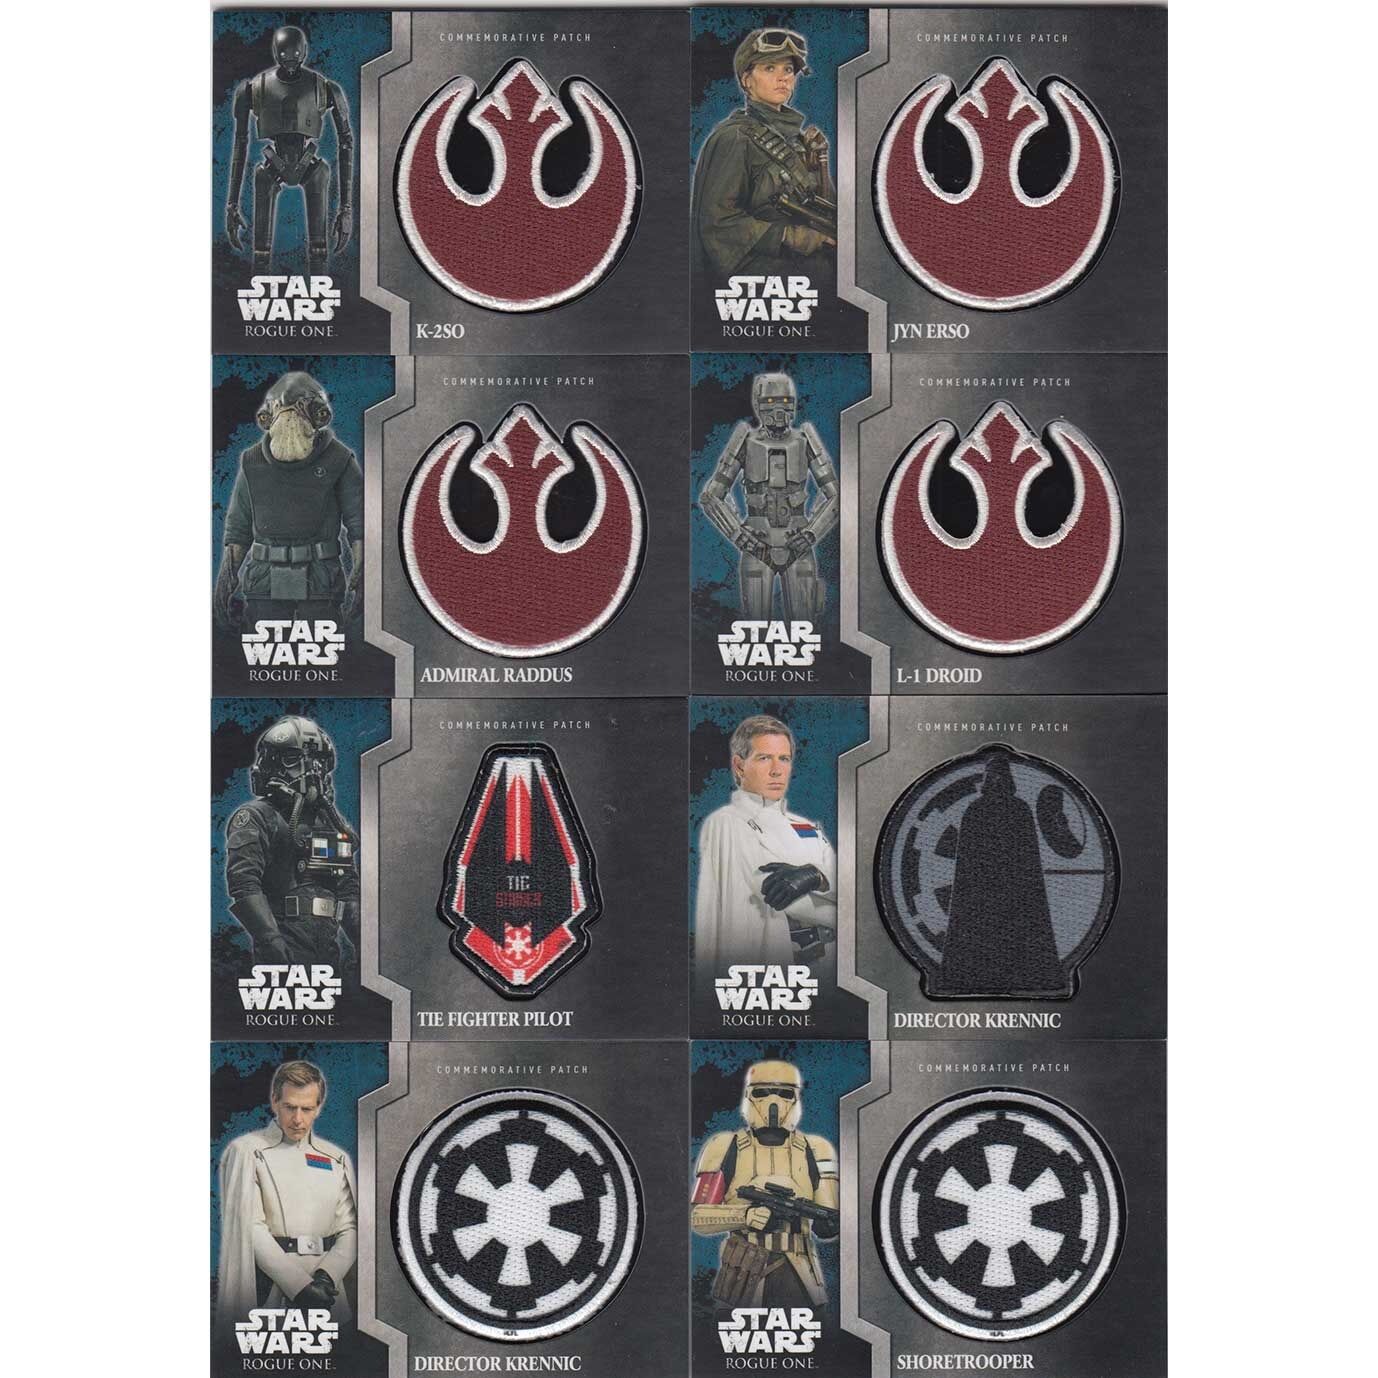 2016 Topps Star Wars Rogue One Mission Briefing Patch Card Set of 13 Cards NEAT